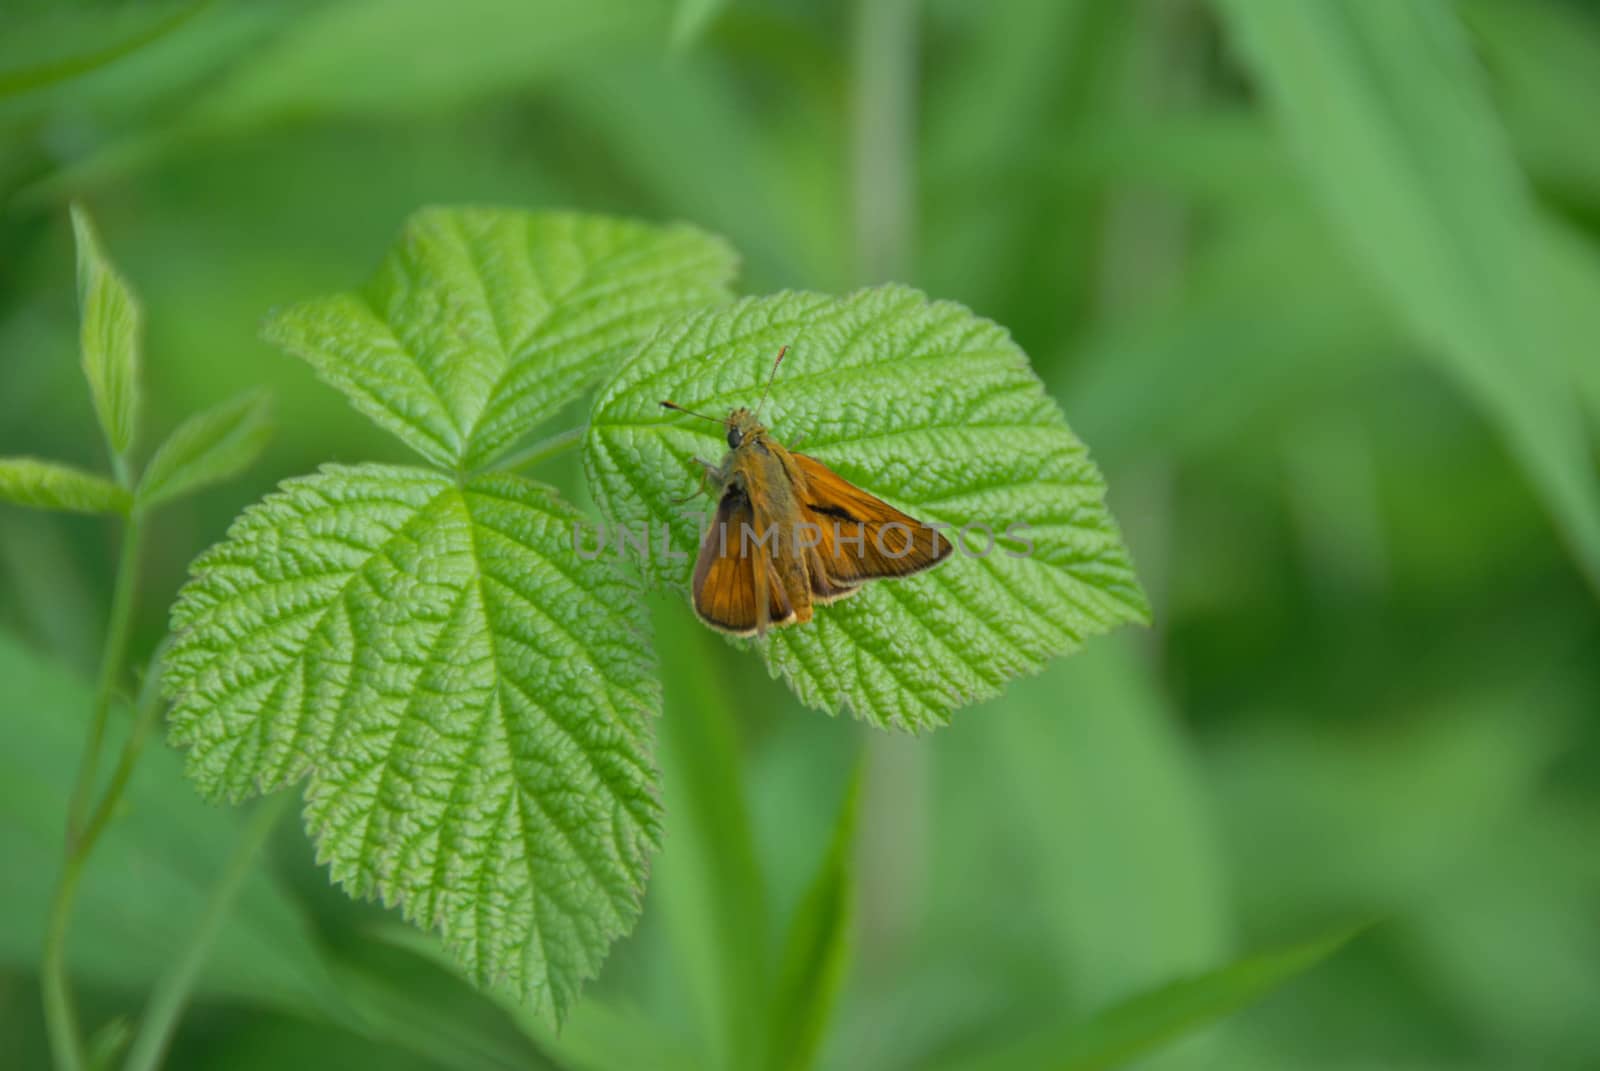 Butterfly resting on a green leaf